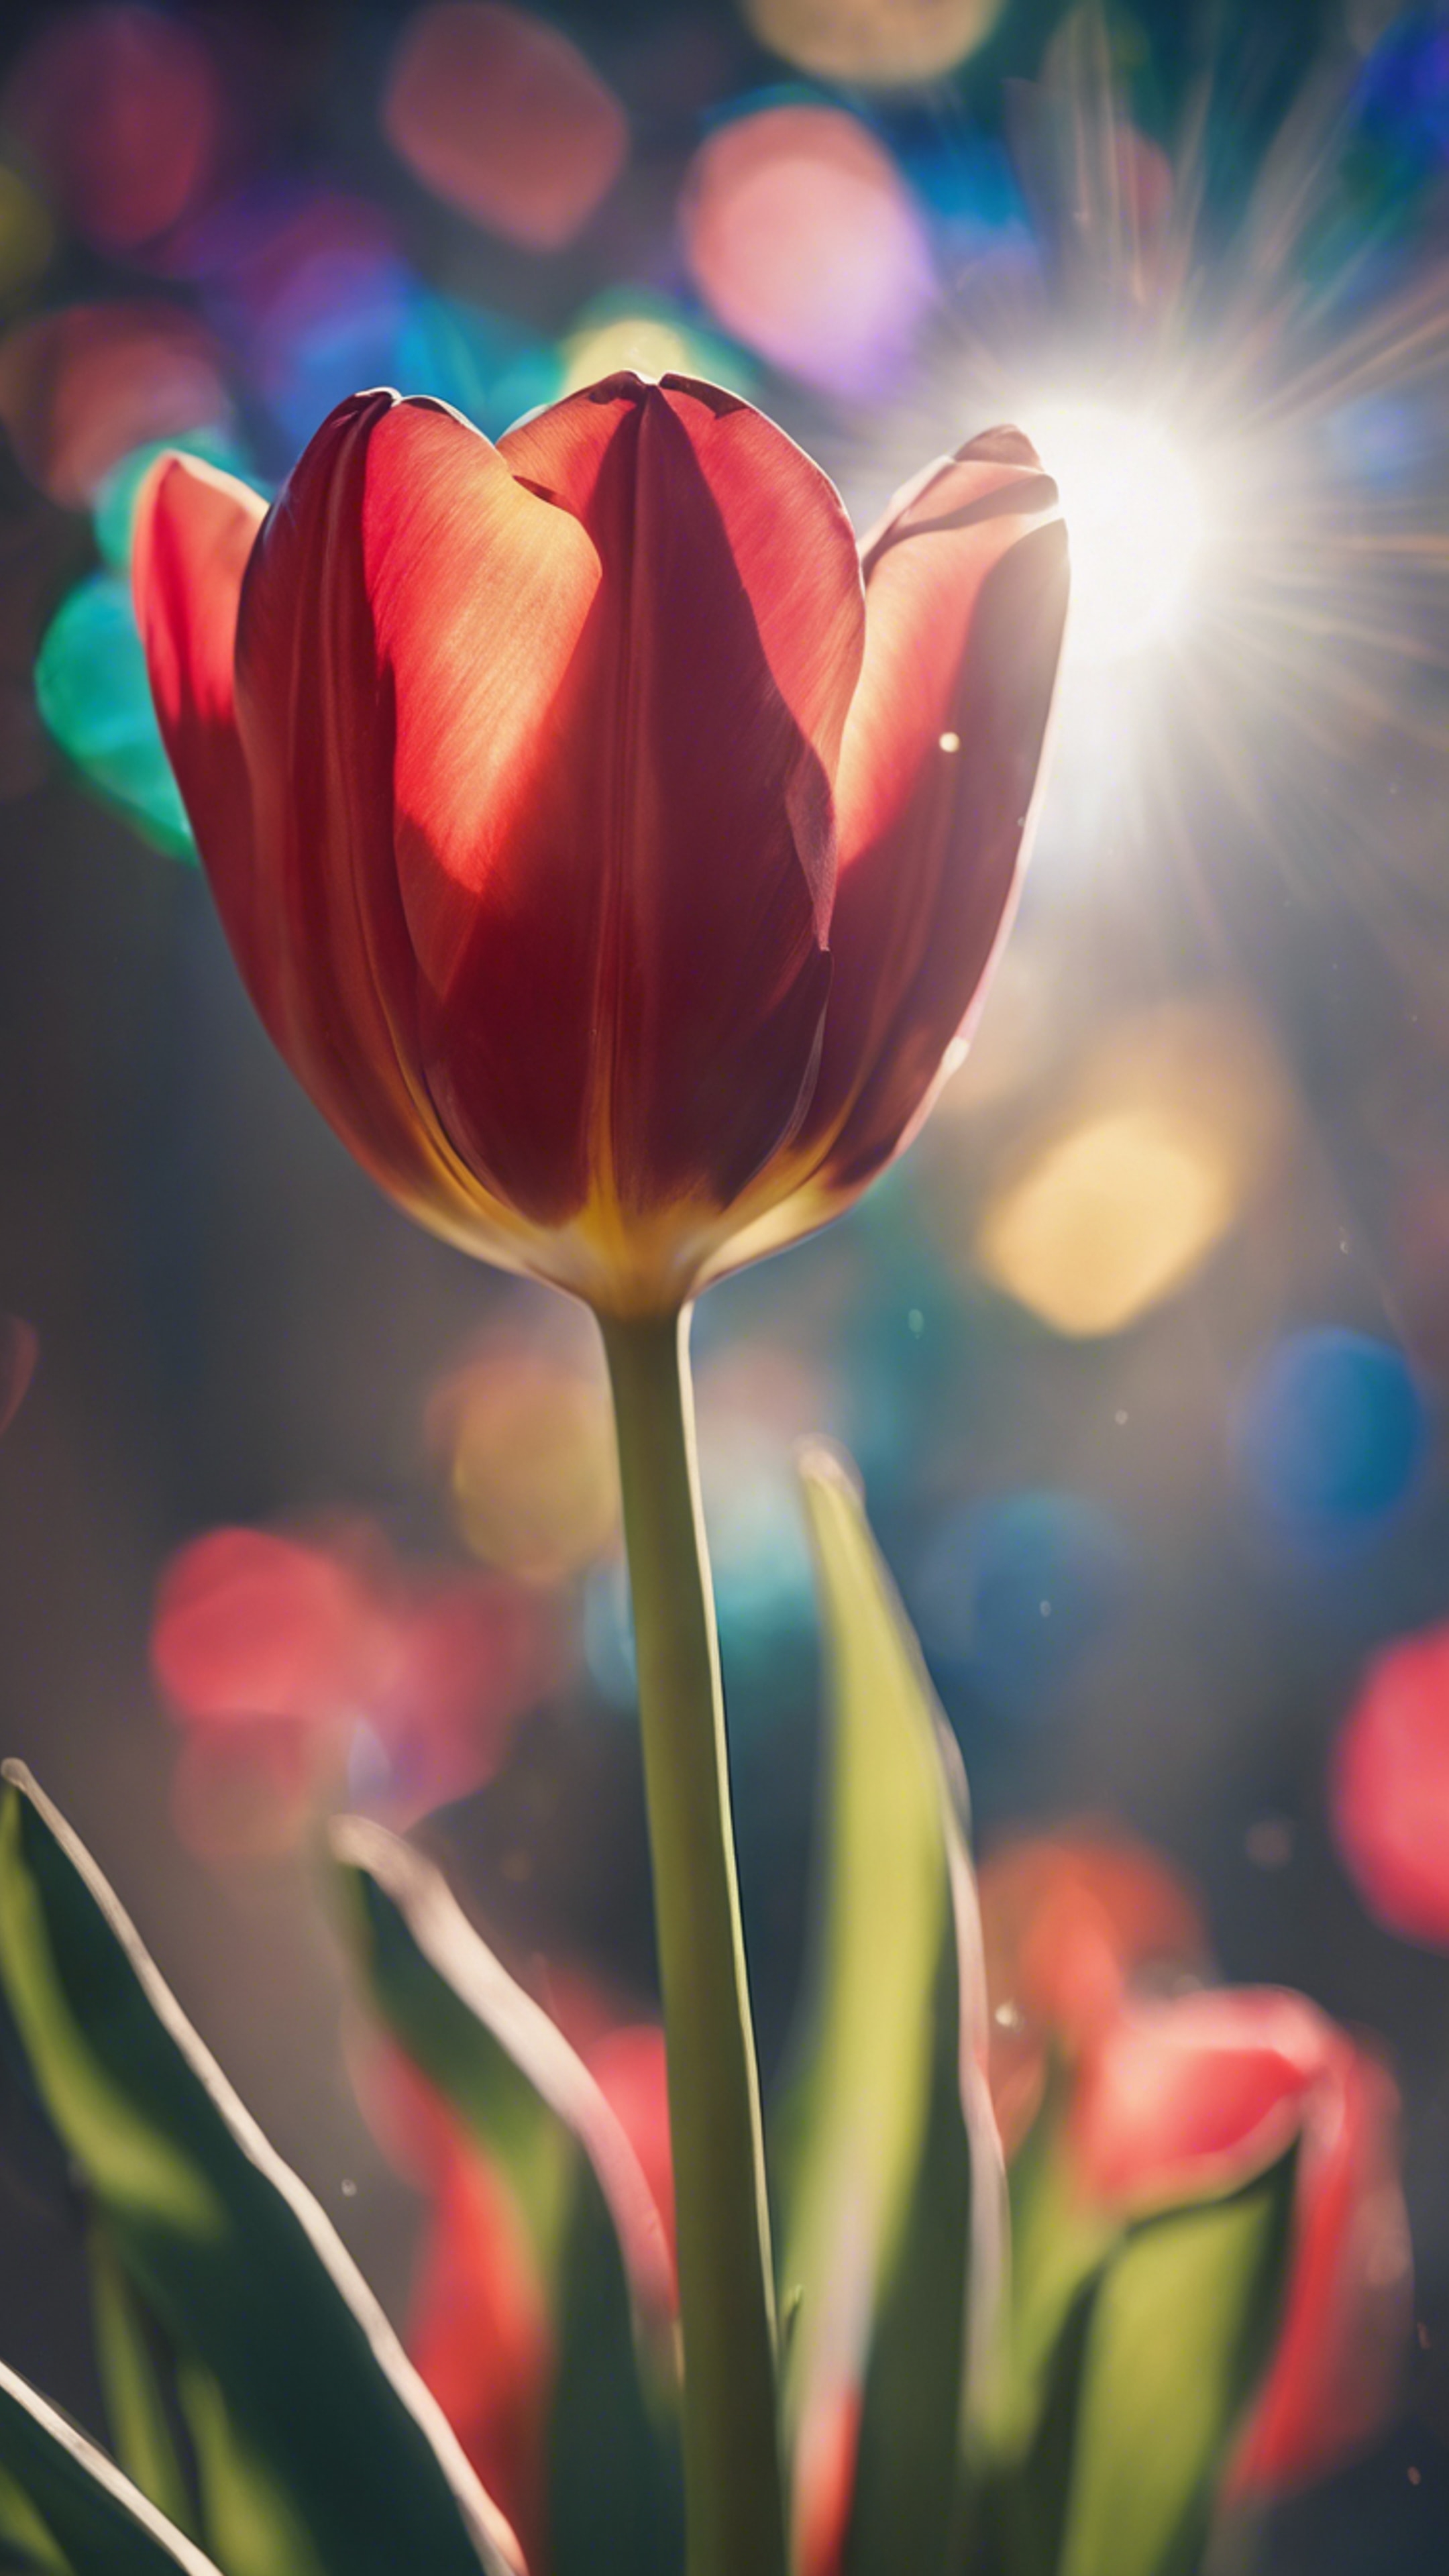 A red tulip refracting the sunlight into a rainbow of colors. Wallpaper[71e41118c38a44538db5]